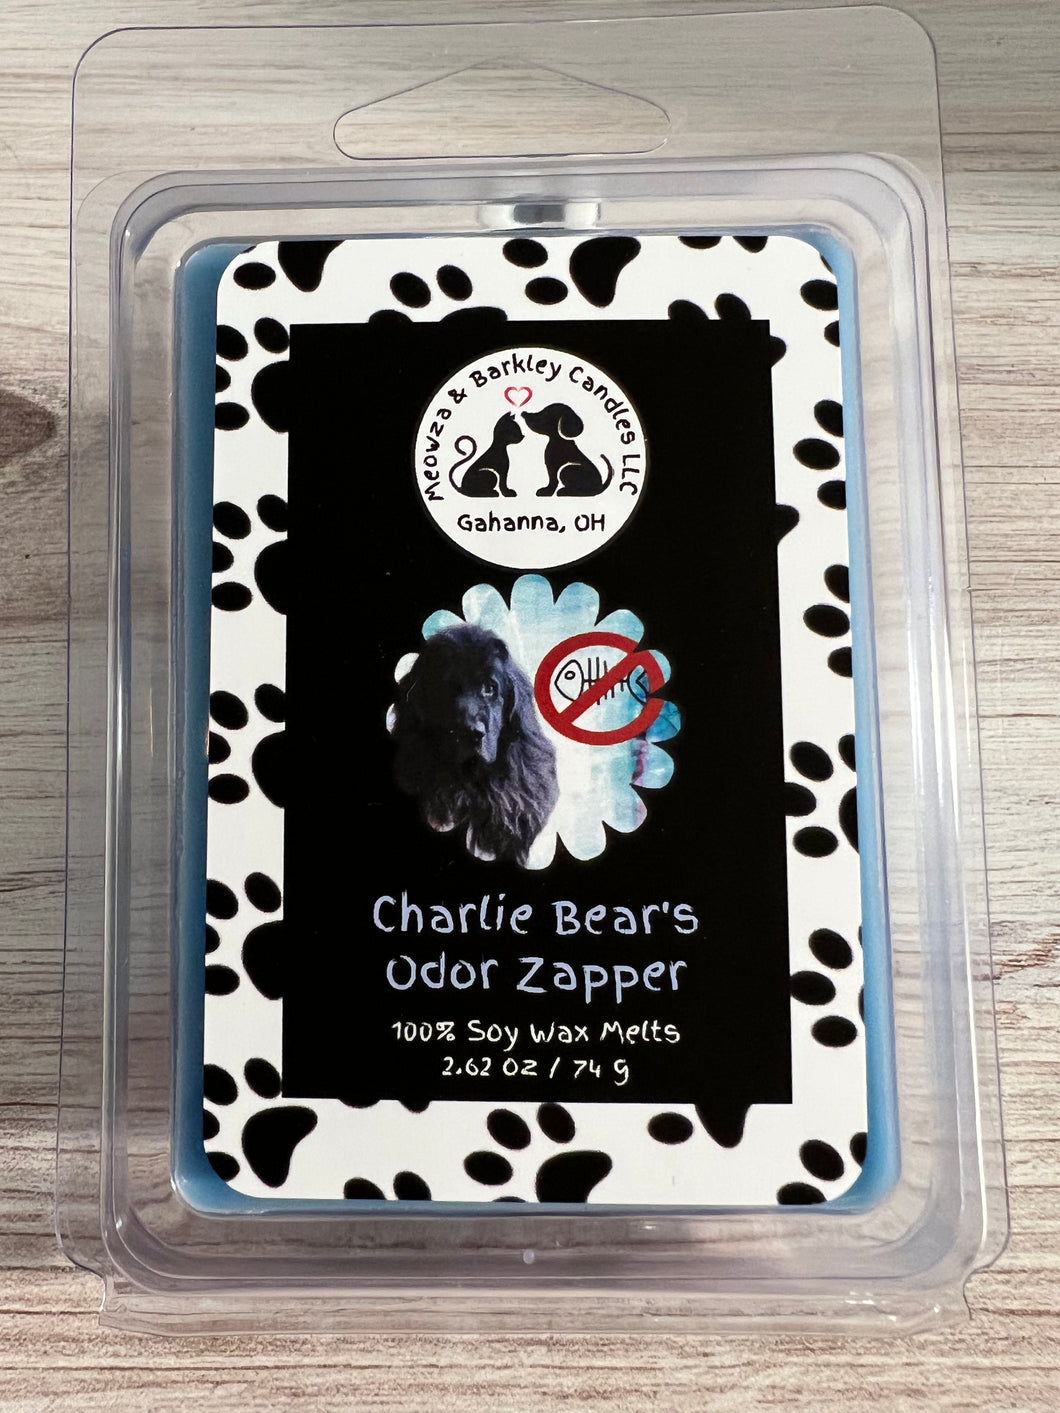 Charlie Bear's Odor Zapper - Odor Removing Soy Clamshell Wax Melts - Set of 6 - Laundry Detergent Like Scent